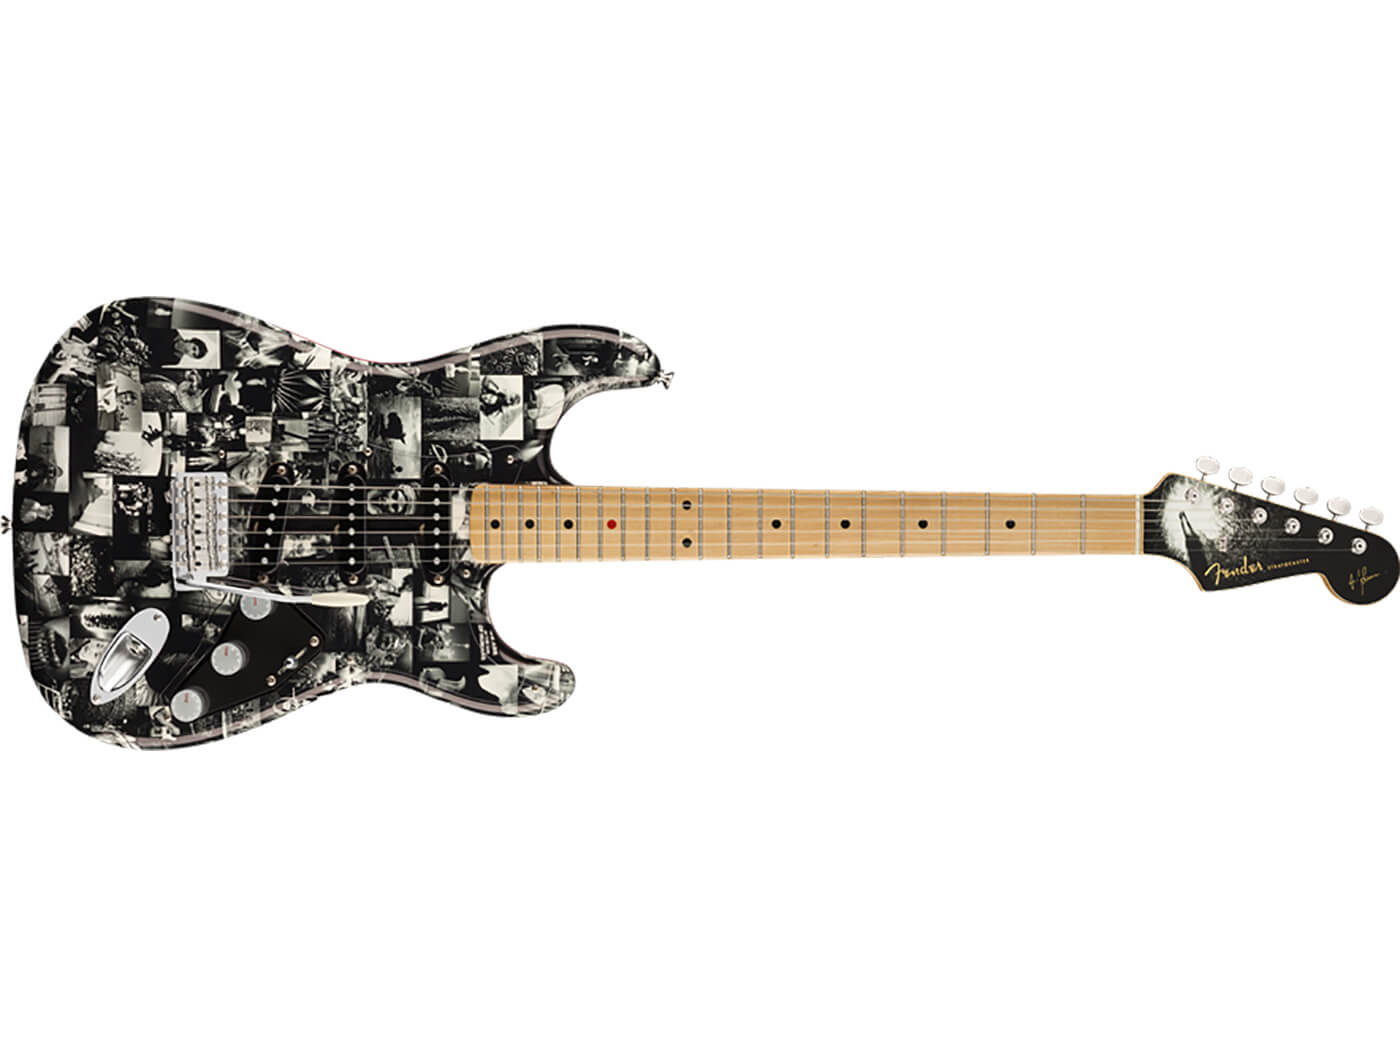 Andy Summers Monochrome Stratocaster